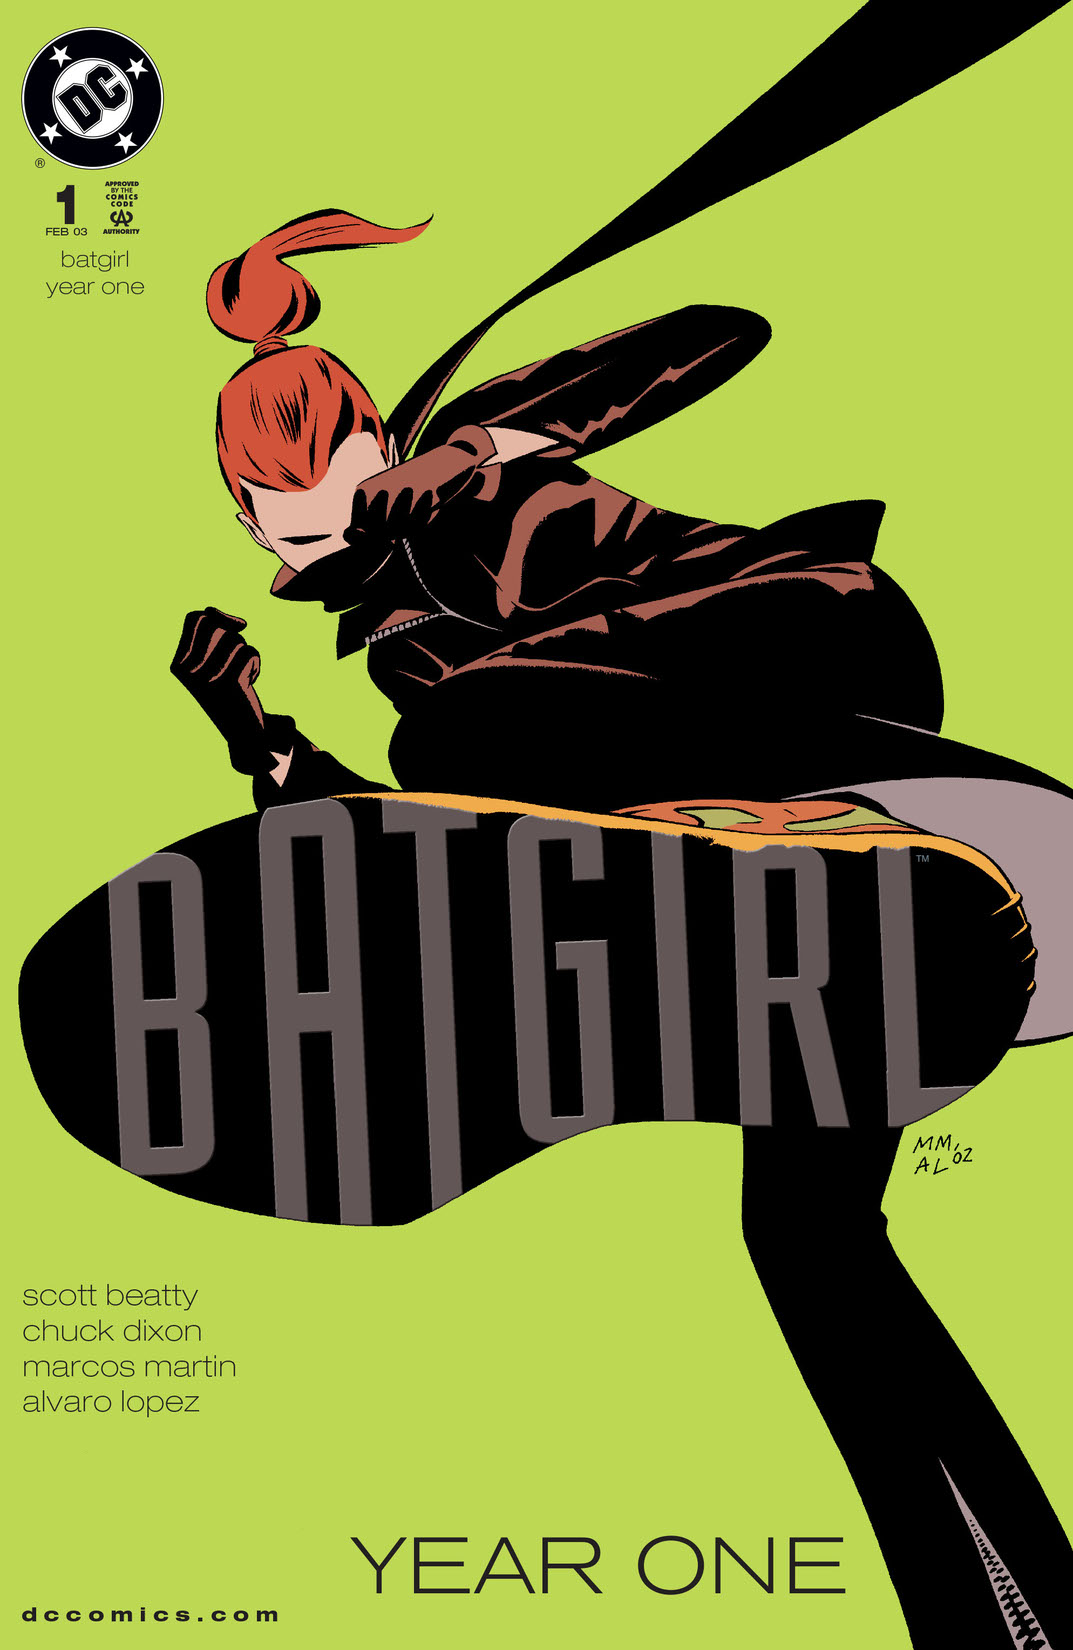 Batgirl Year One #1 preview images